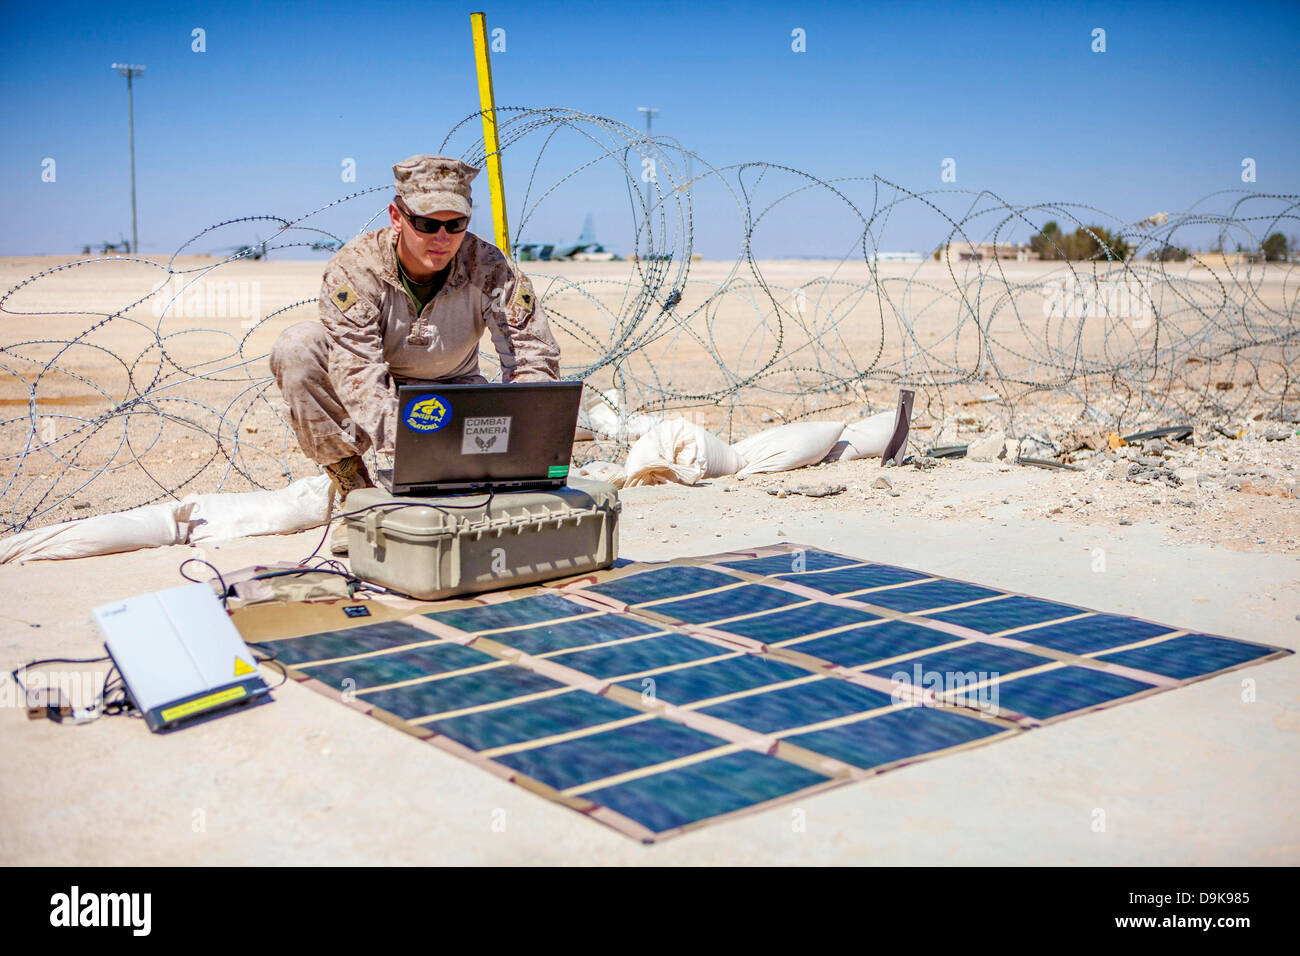 US Marine photographer Christopher Q. Stone transmits photos using a Broadband Global Area Network satellite phone powered by a Solar Portable Alternative Communications Energy System June 18, 2013 at King Faisal Air Base in Jordan. Stock Photo